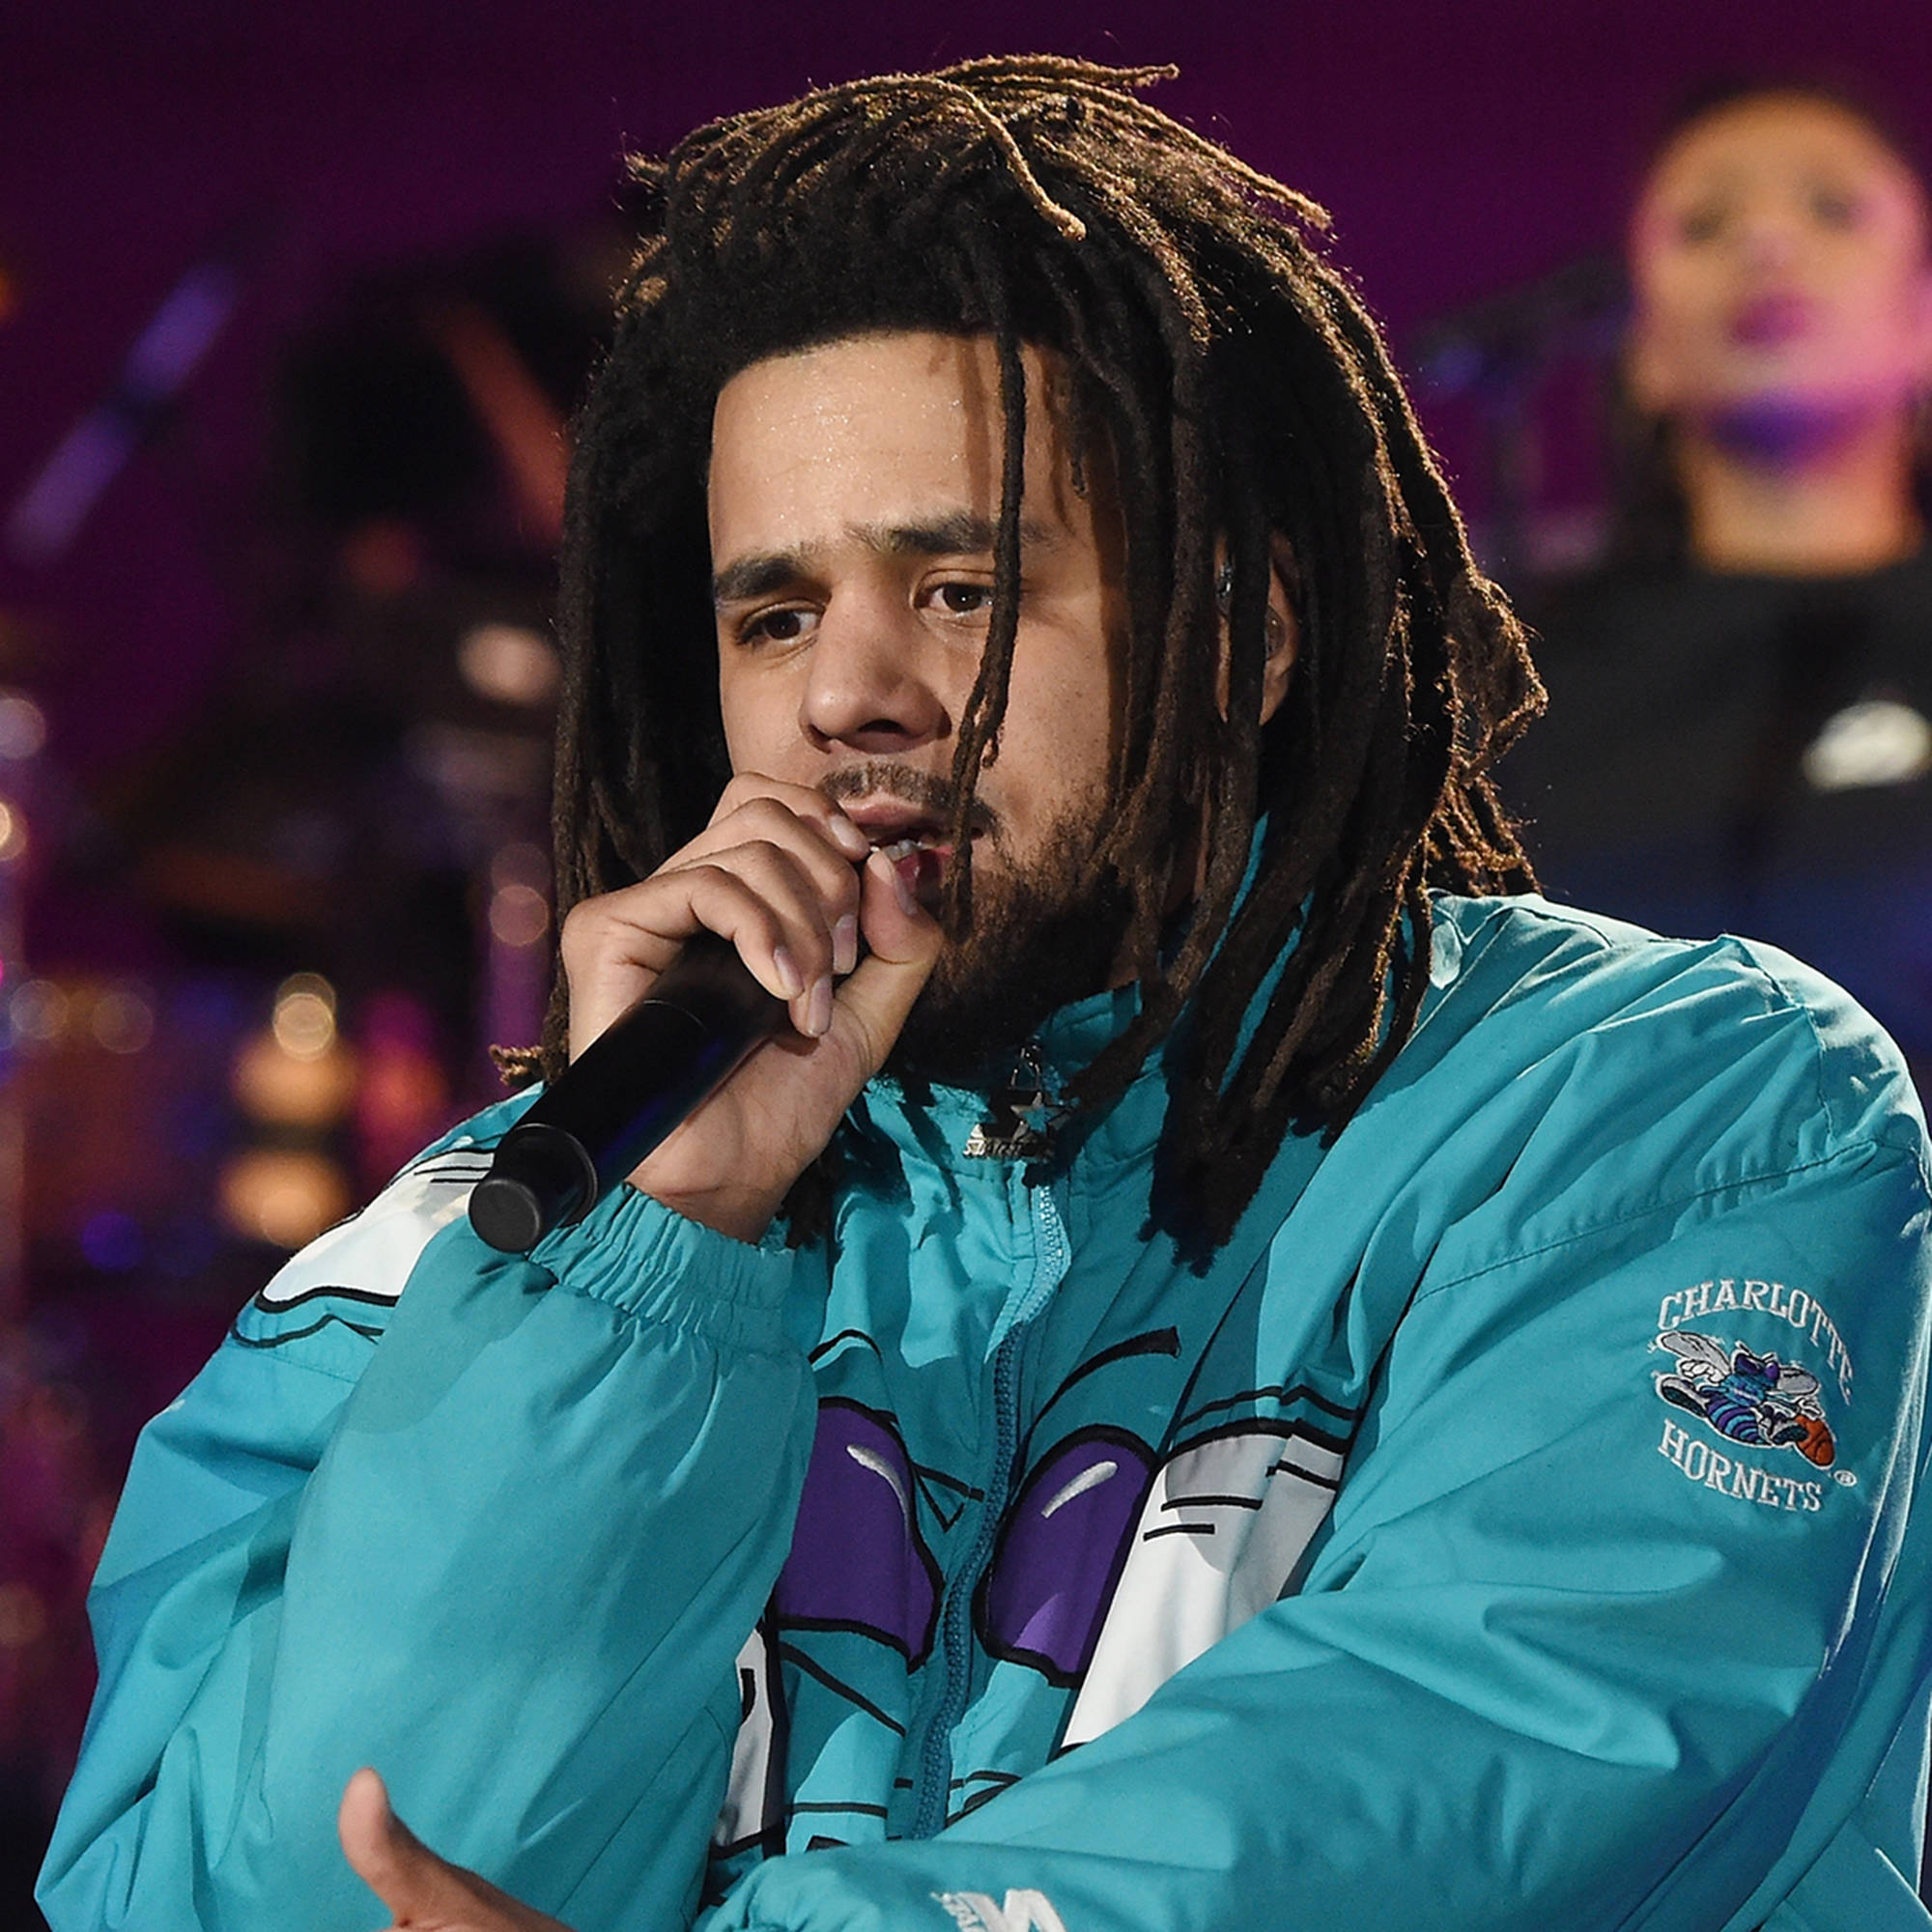 J. Cole Biography: Age, Wife, Net Worth, Songs, Parents, Brothers, Albums, Lyrics, Children